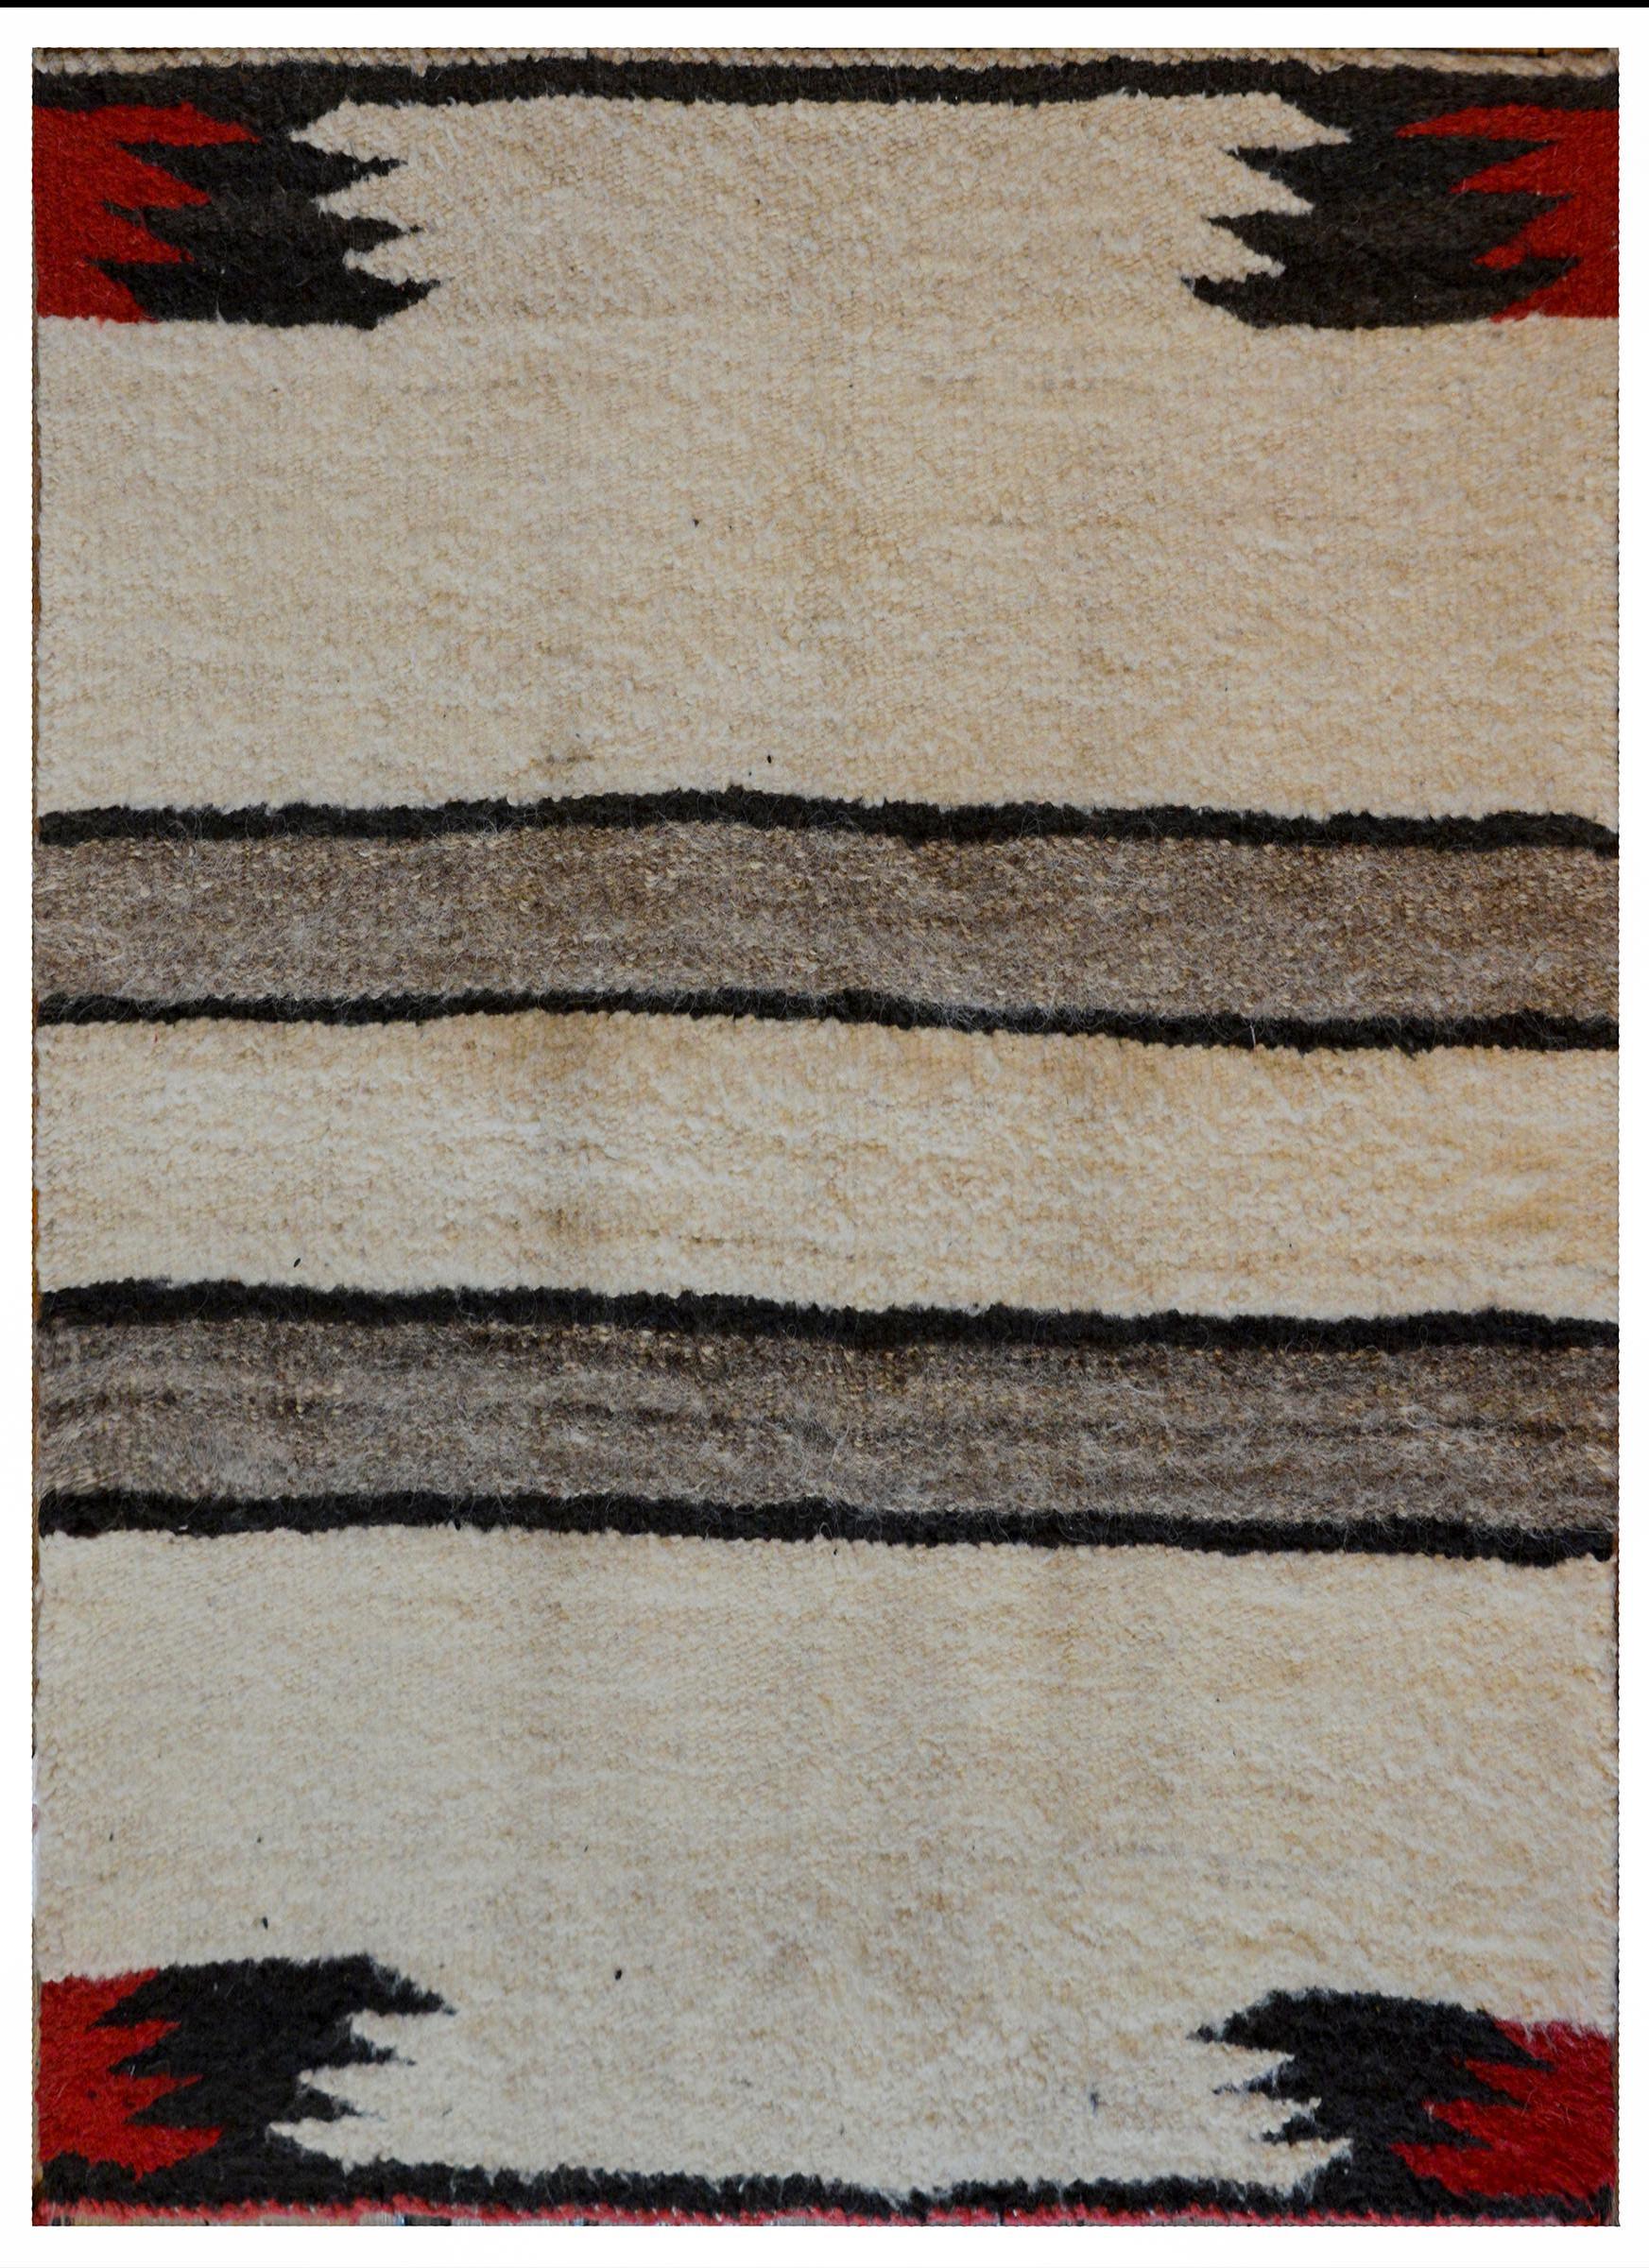 A gorgeous early 20th century Navajo rug with a natural cream wool background with two wide gray and black stripes in the center, and red and black zigzag patterned motifs in each of the corners.